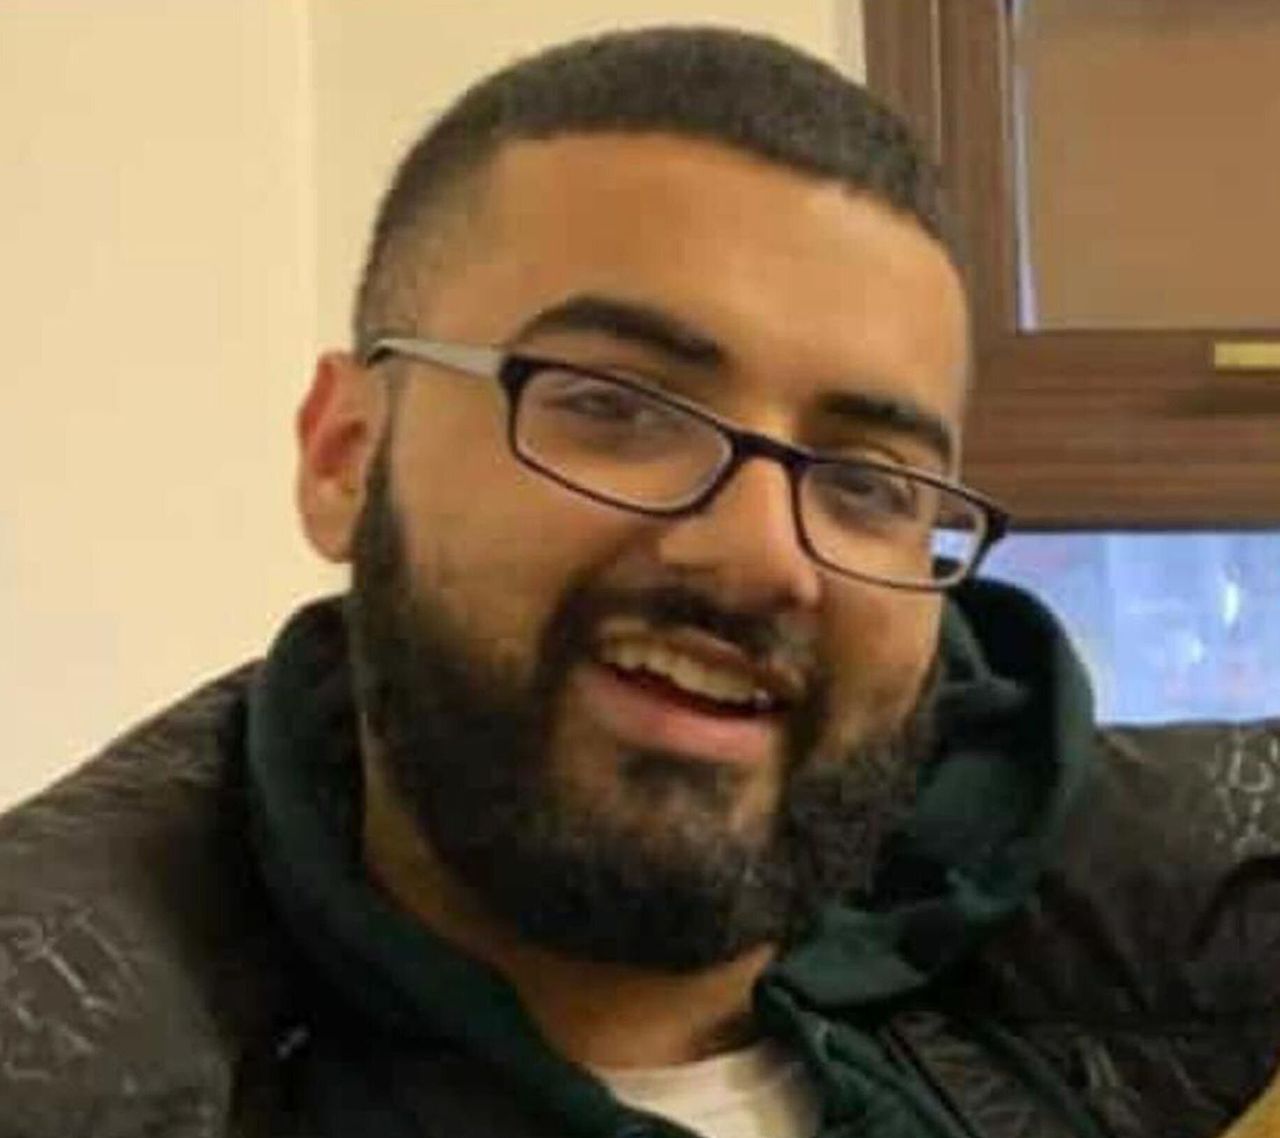 Mohammed Usman Mirza was fatally stabbed outside Owen Waters House, Ilford